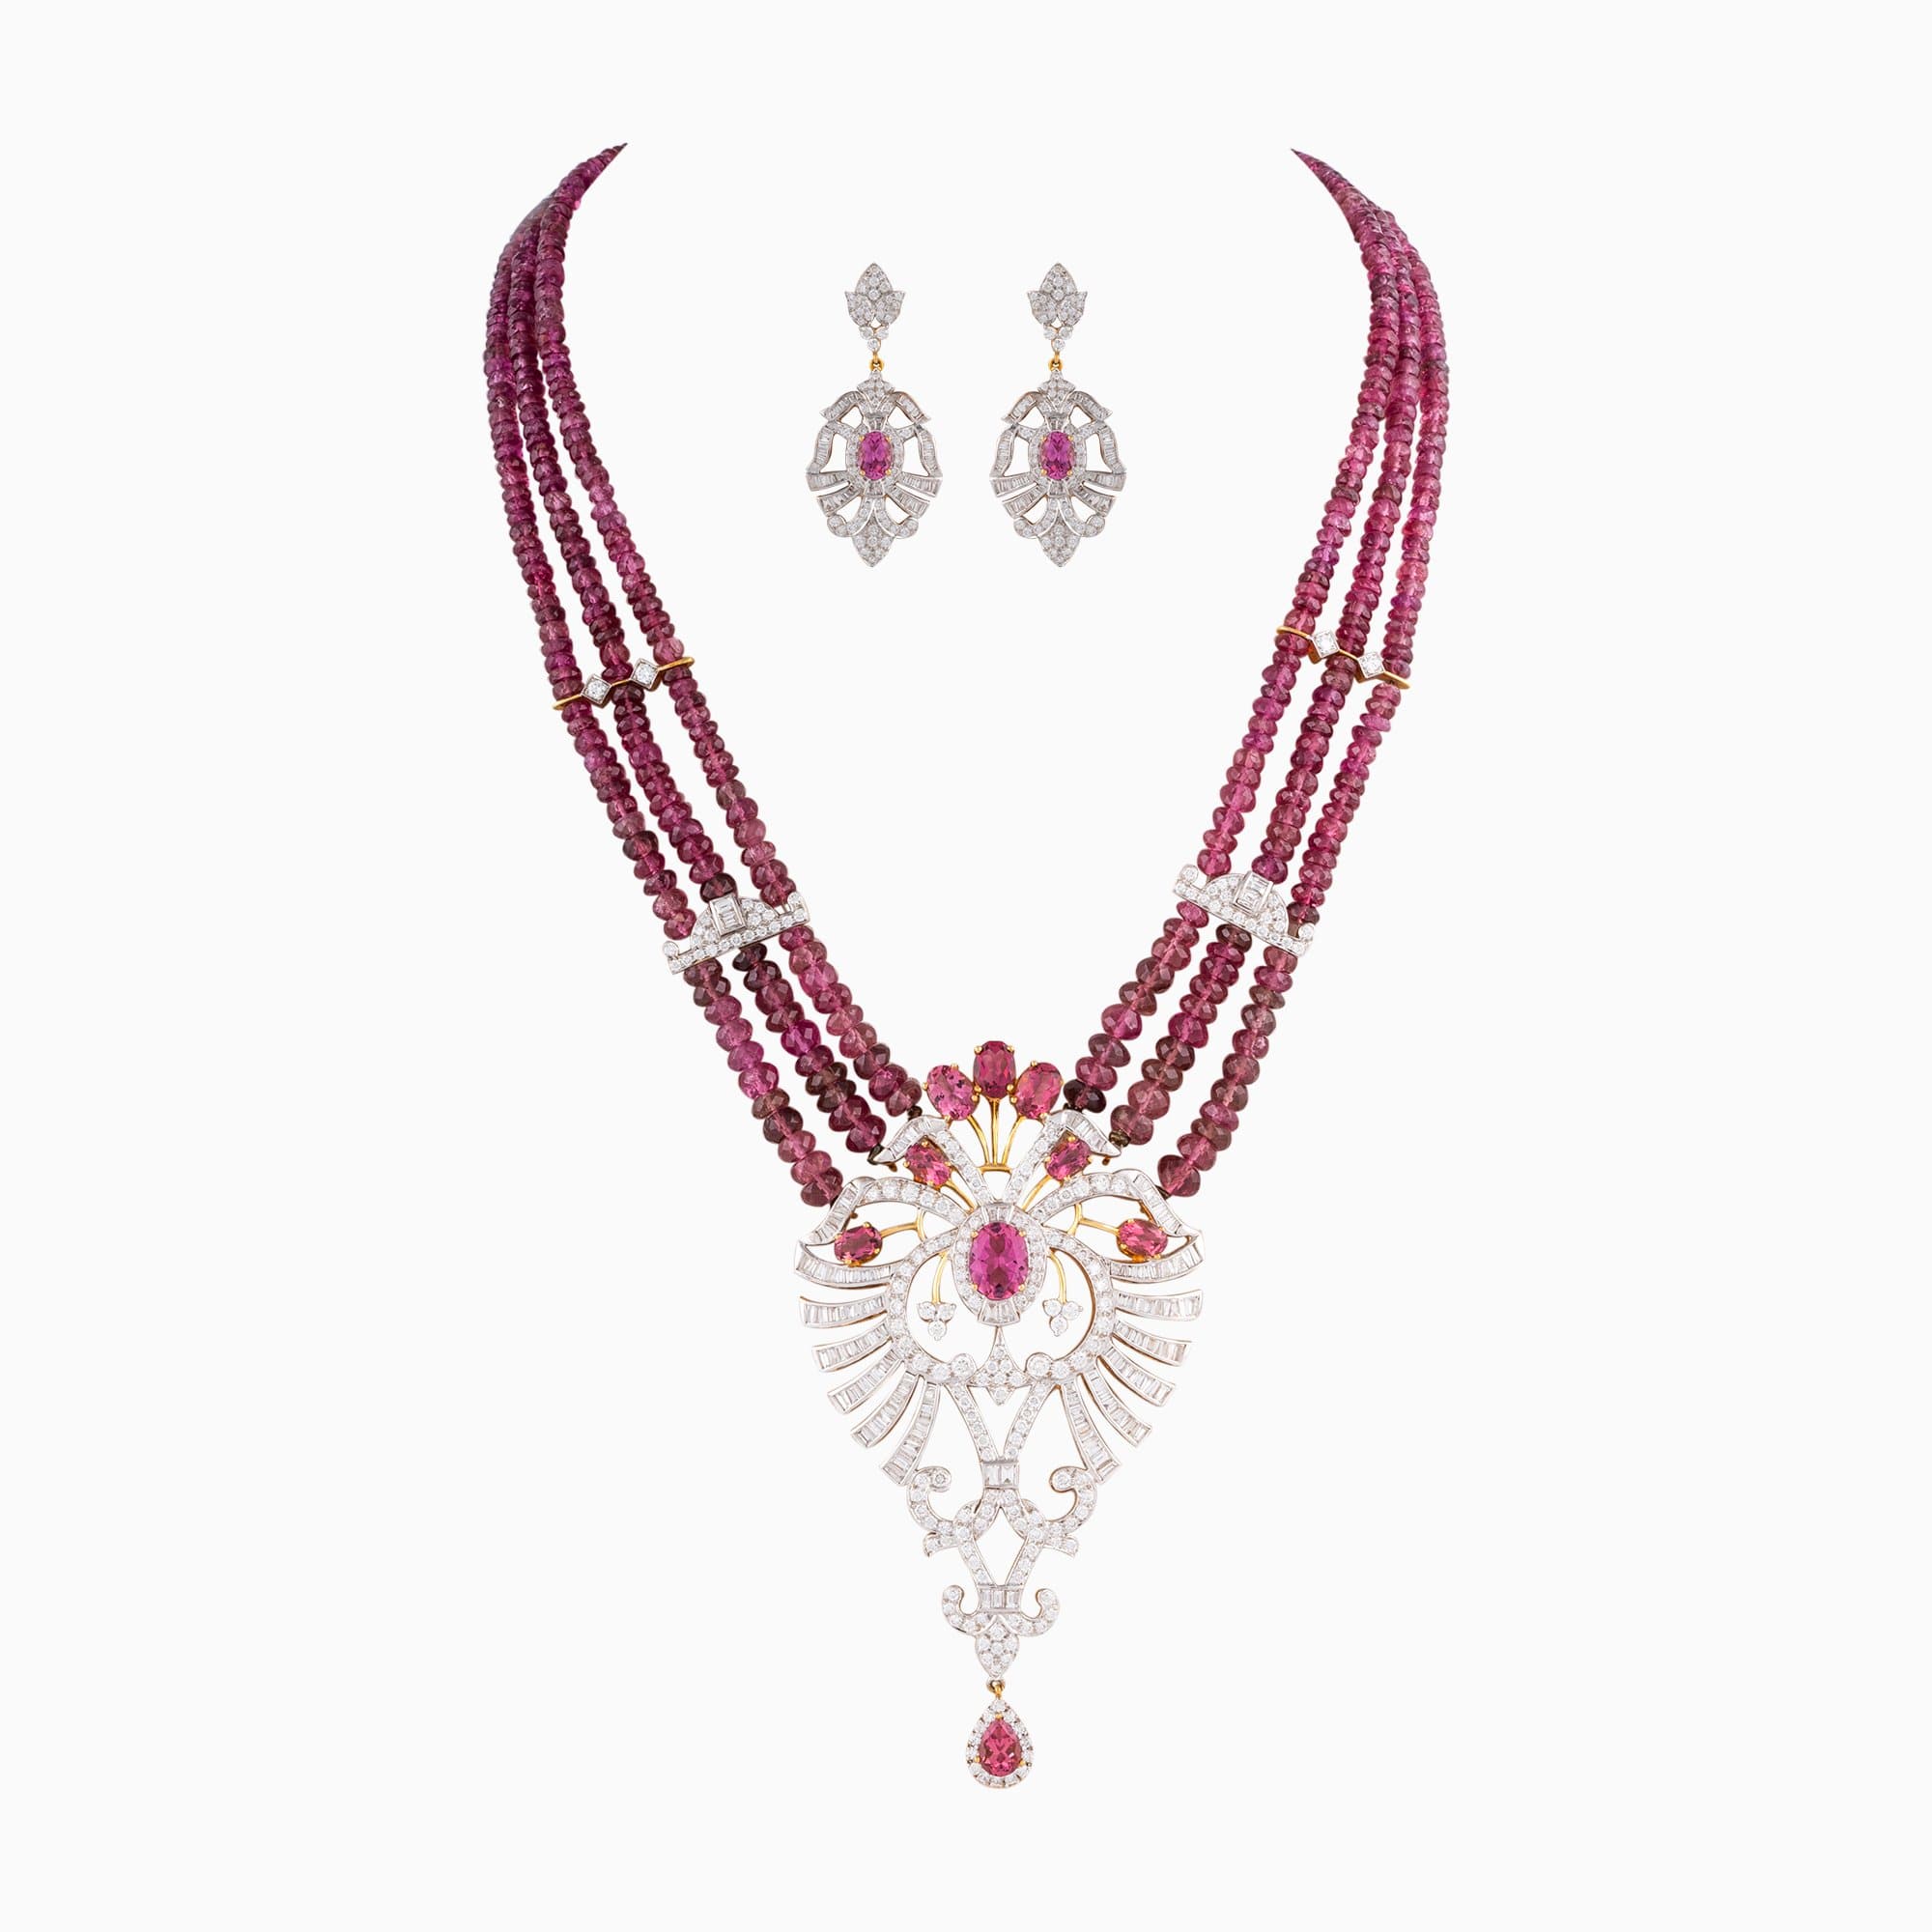 Necklace and Earring Pair with Round Cut Diamond, BG. , Turm Cut Oval, Pear Shaped, Turm Faceted Beads - WDN732